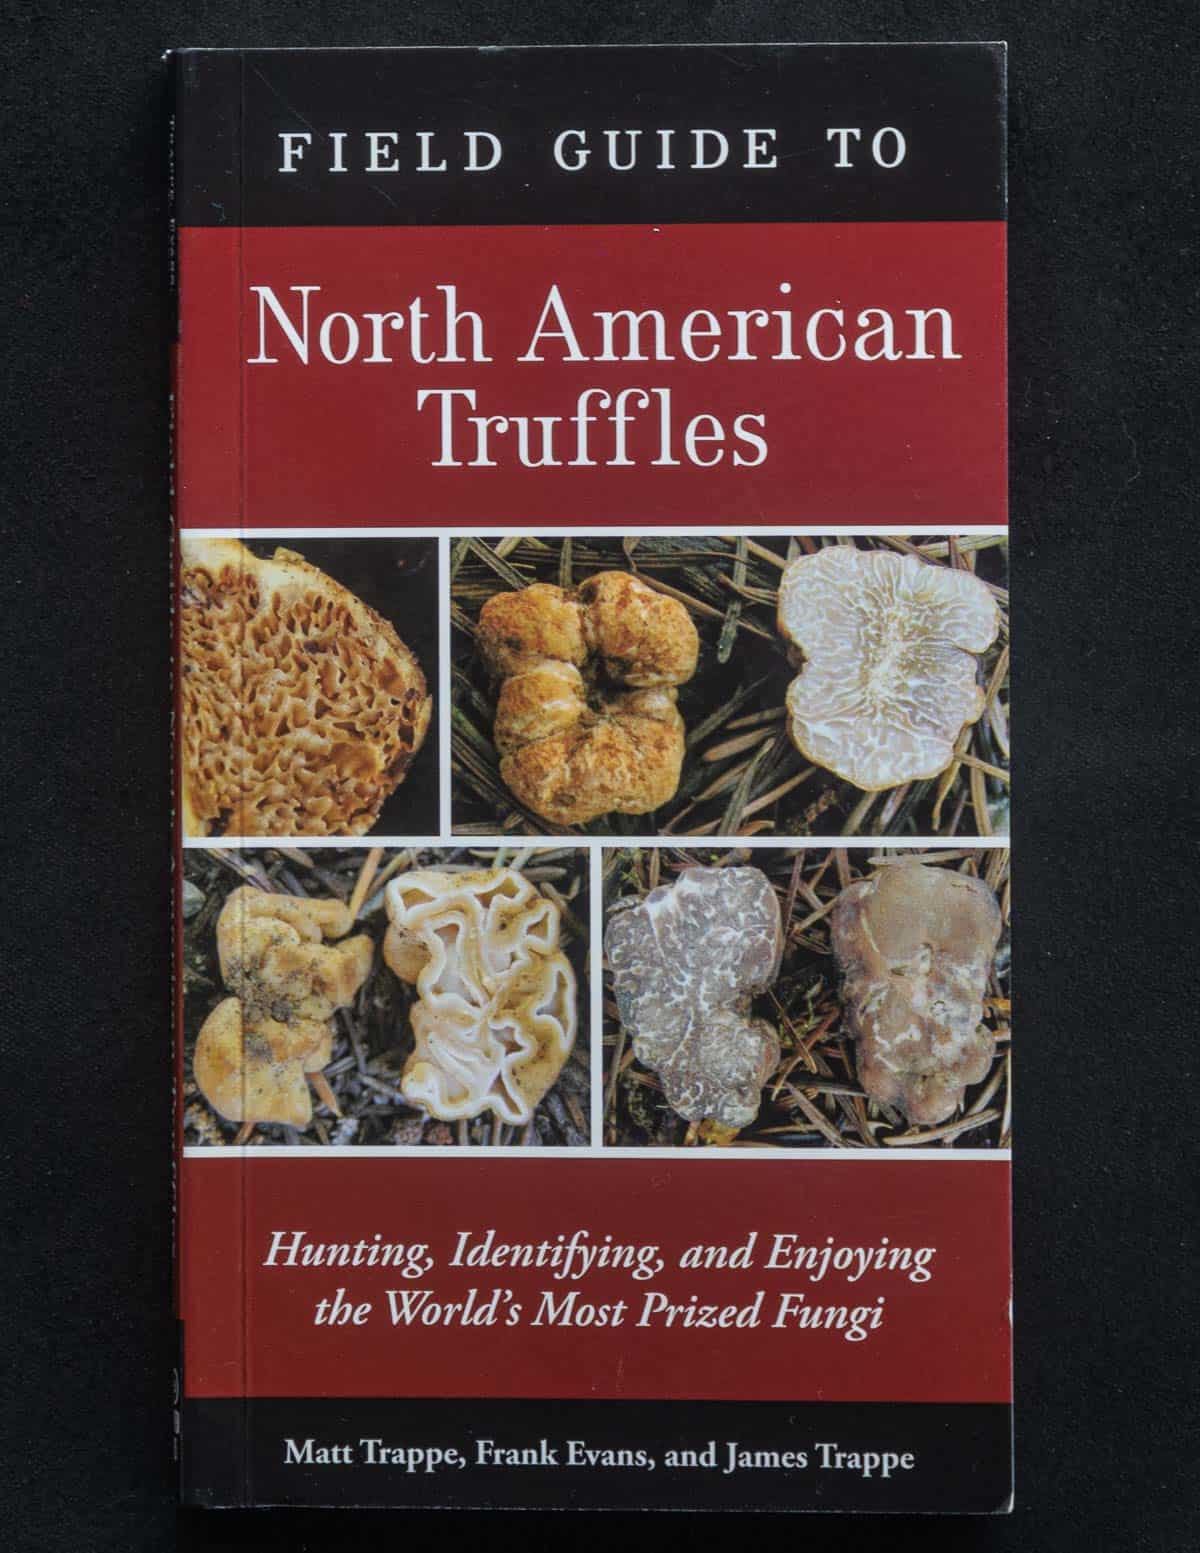 A field guide for hunting truffles in North America. 